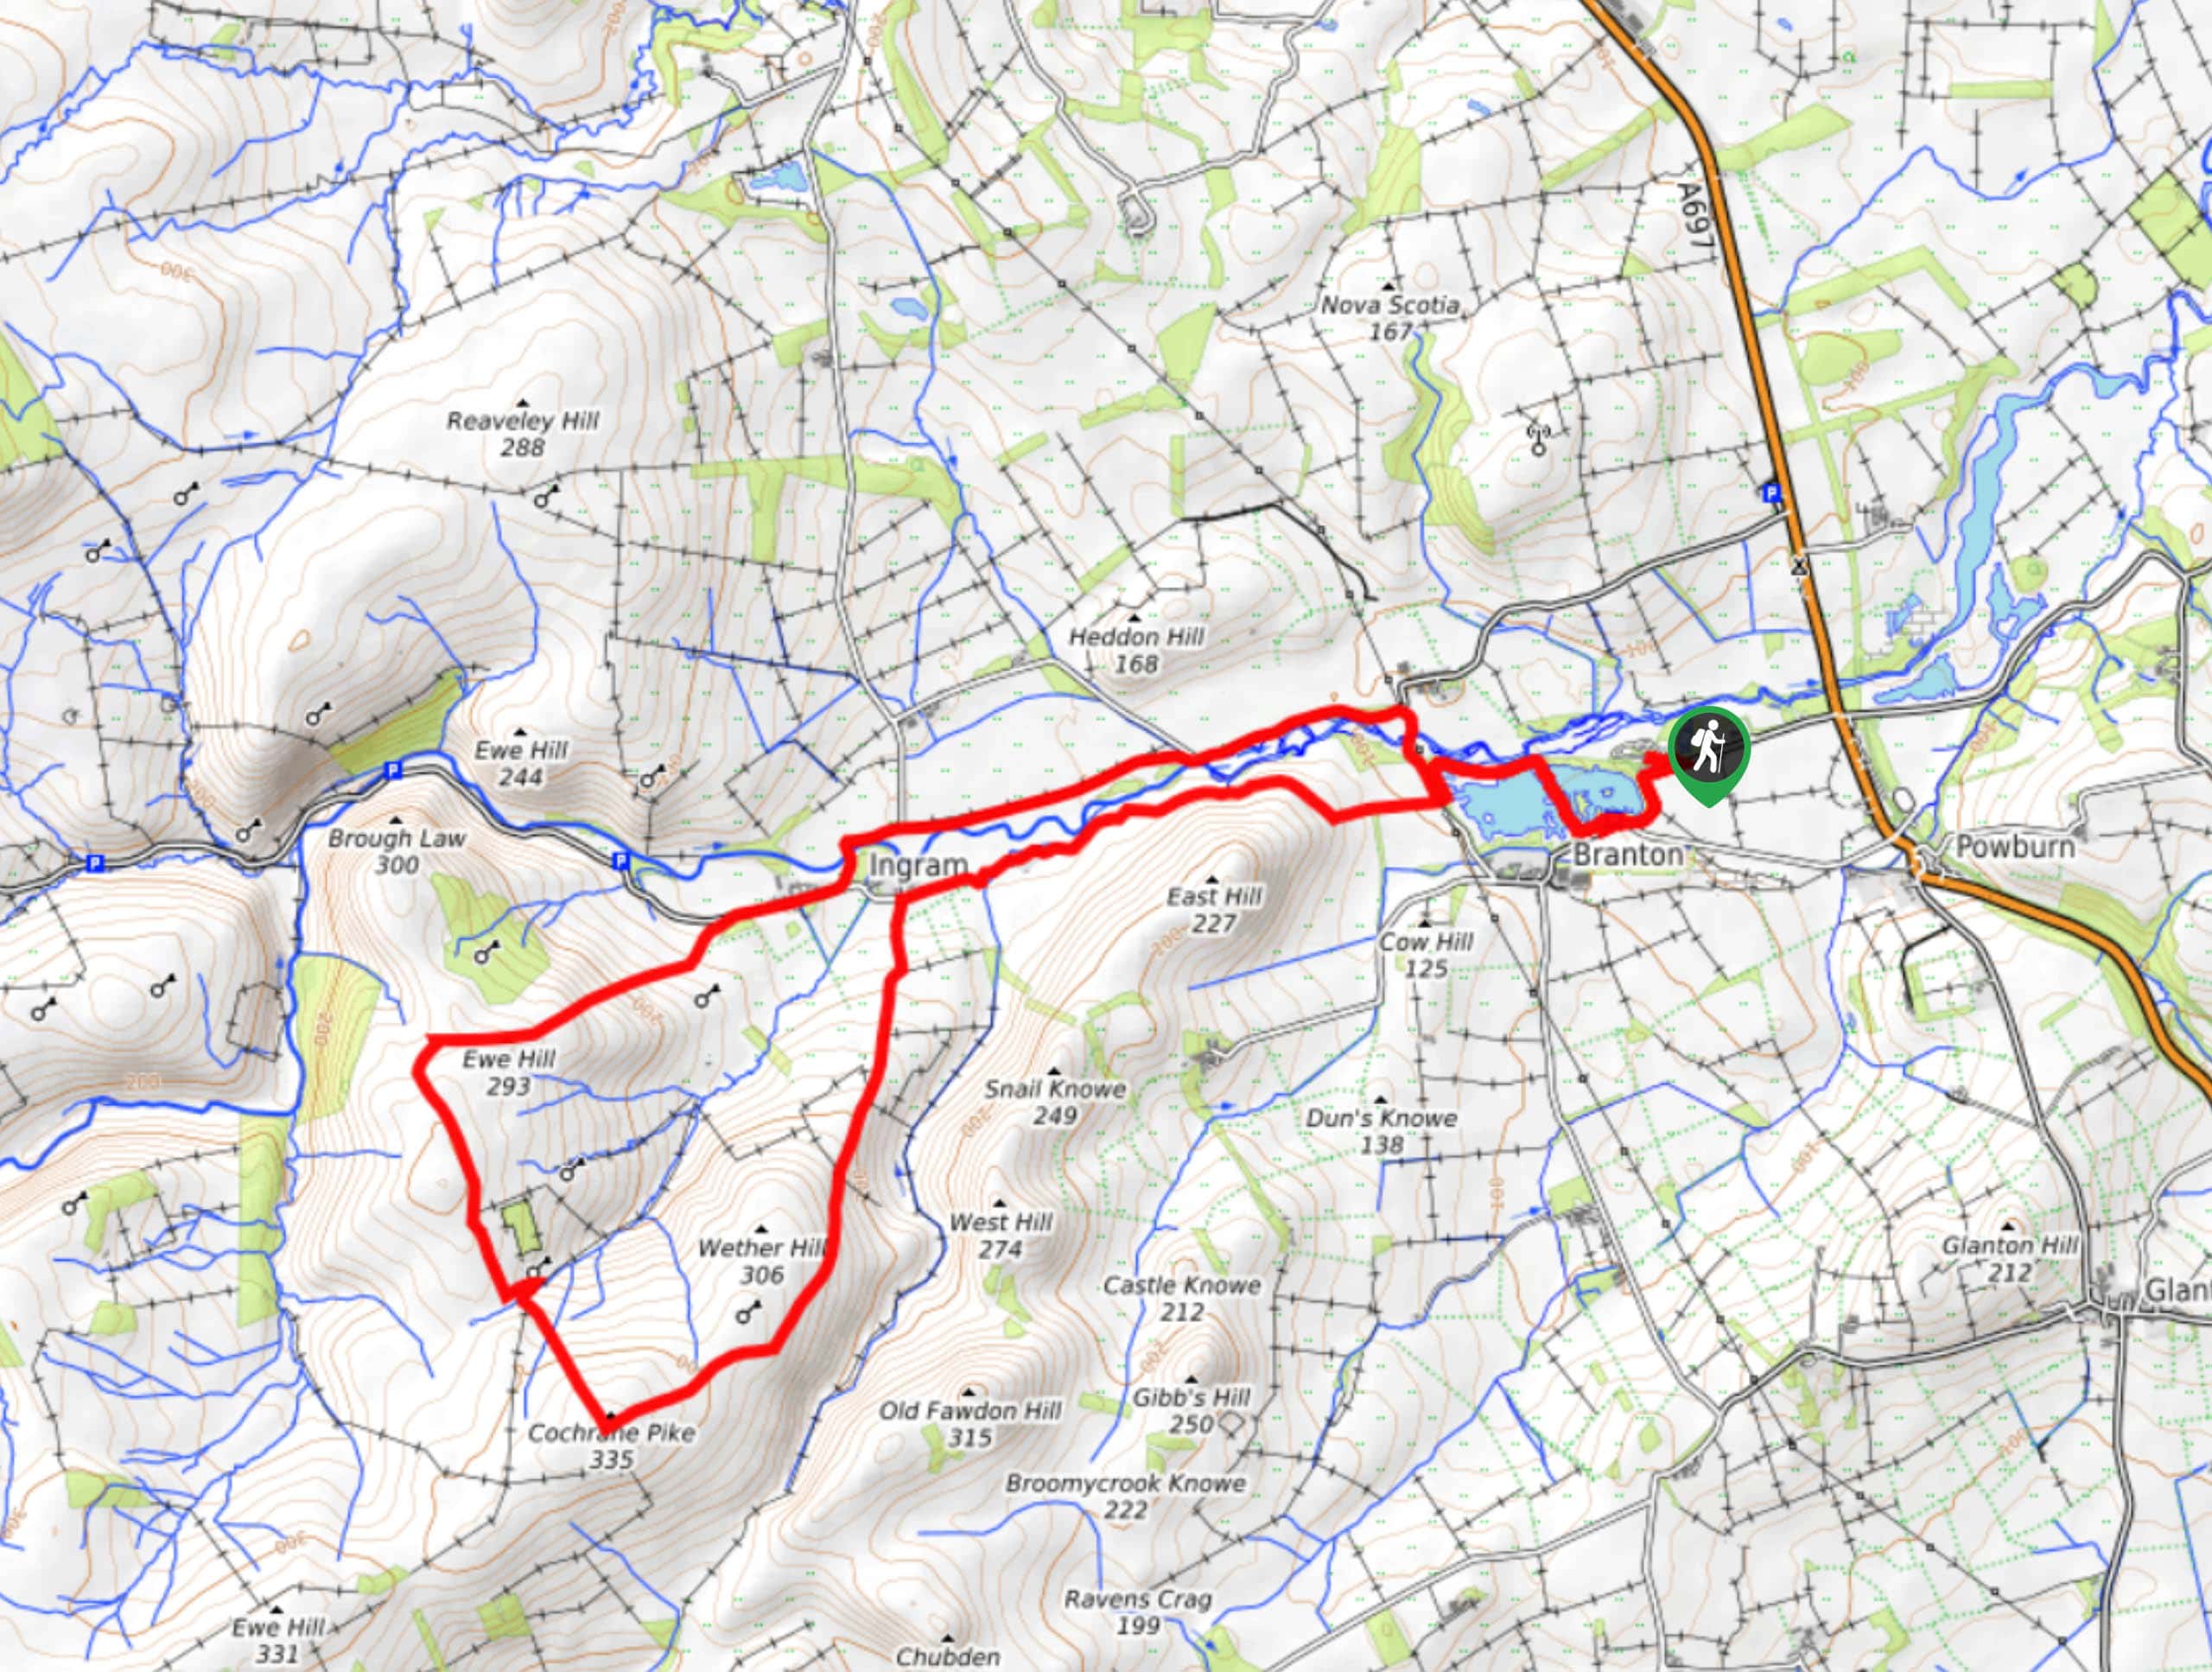 Ingram Wether Hill and Ewe Hill Road Walk Map